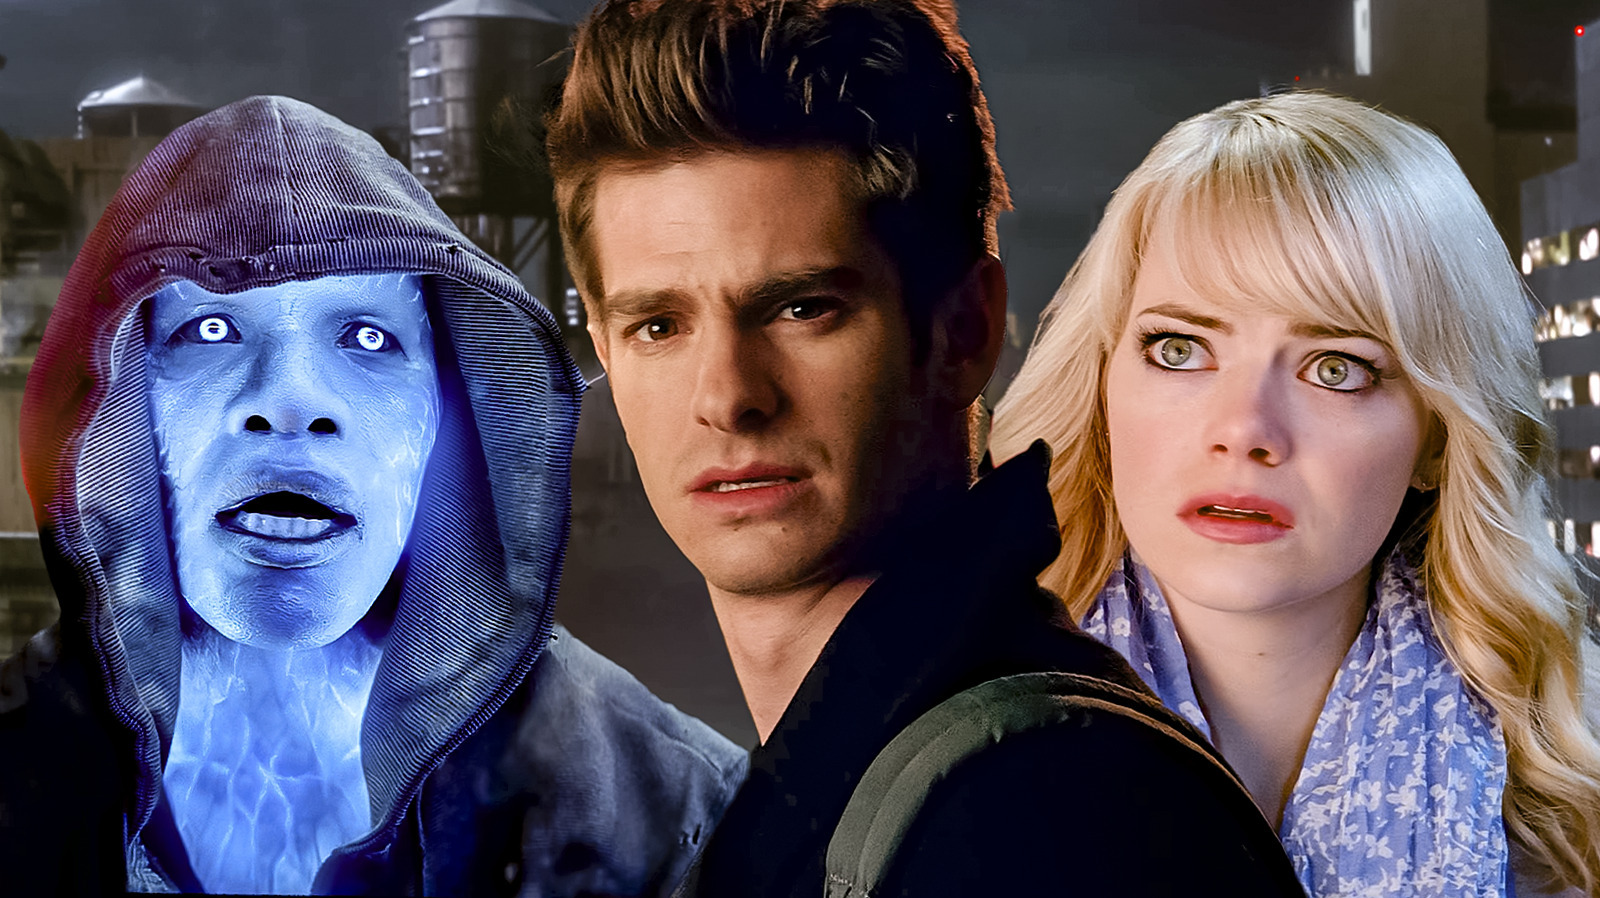 Amazing Spider-Man 3: Will Andrew Garfield Return for Another Movie?